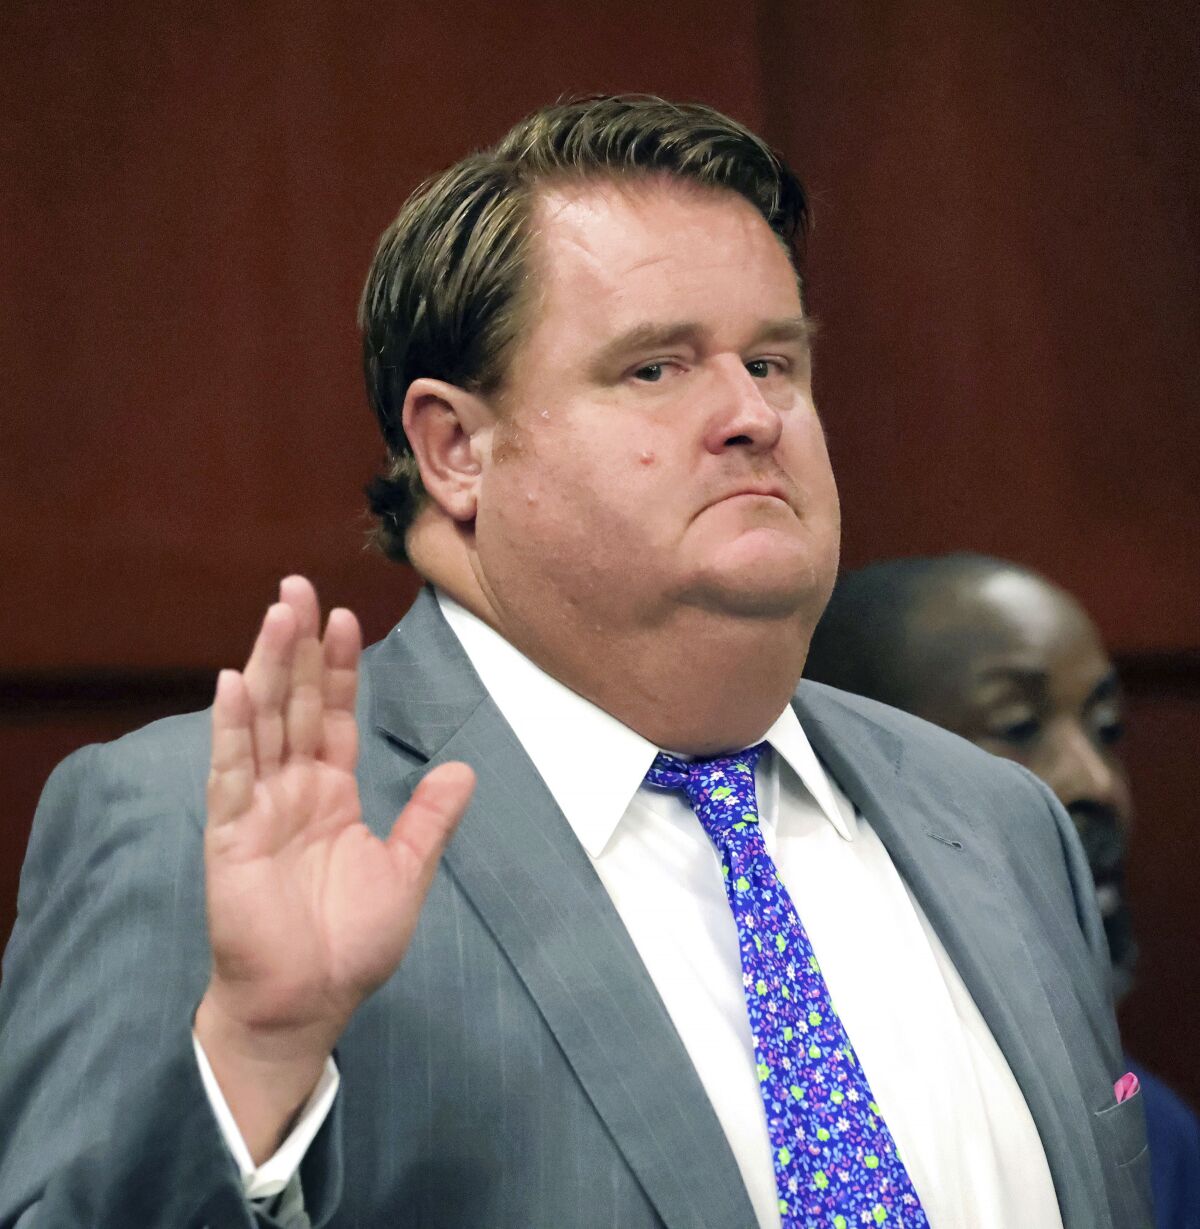 Political consultant Eric Foglesong raises his hand to be sworn-in to testify in an arraignment in Seminole Circuit Court in Sanford, Fla., Tuesday, Aug. 2, 2022. Foglesong pleaded not guilty to felony charges of misreporting contributions to a "ghost candidate" during the campaign for a Florida Senate seat in 2020. (Joe Burbank/Orlando Sentinel via AP)